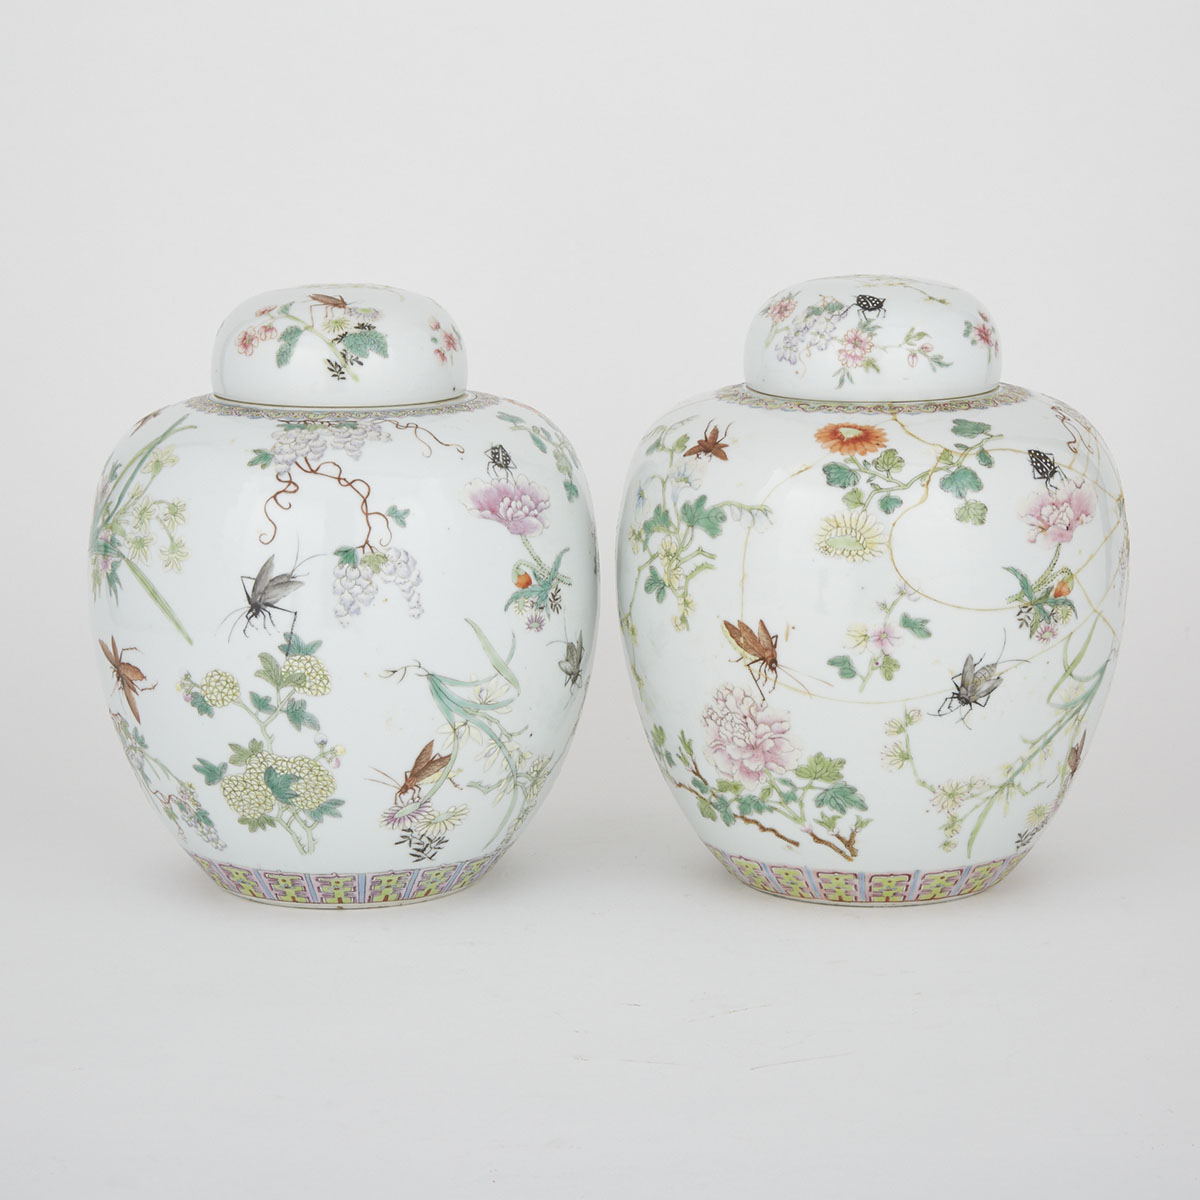 A Pair of Famille Rose Insect and Flora Ginger Jars, Guangxu Period